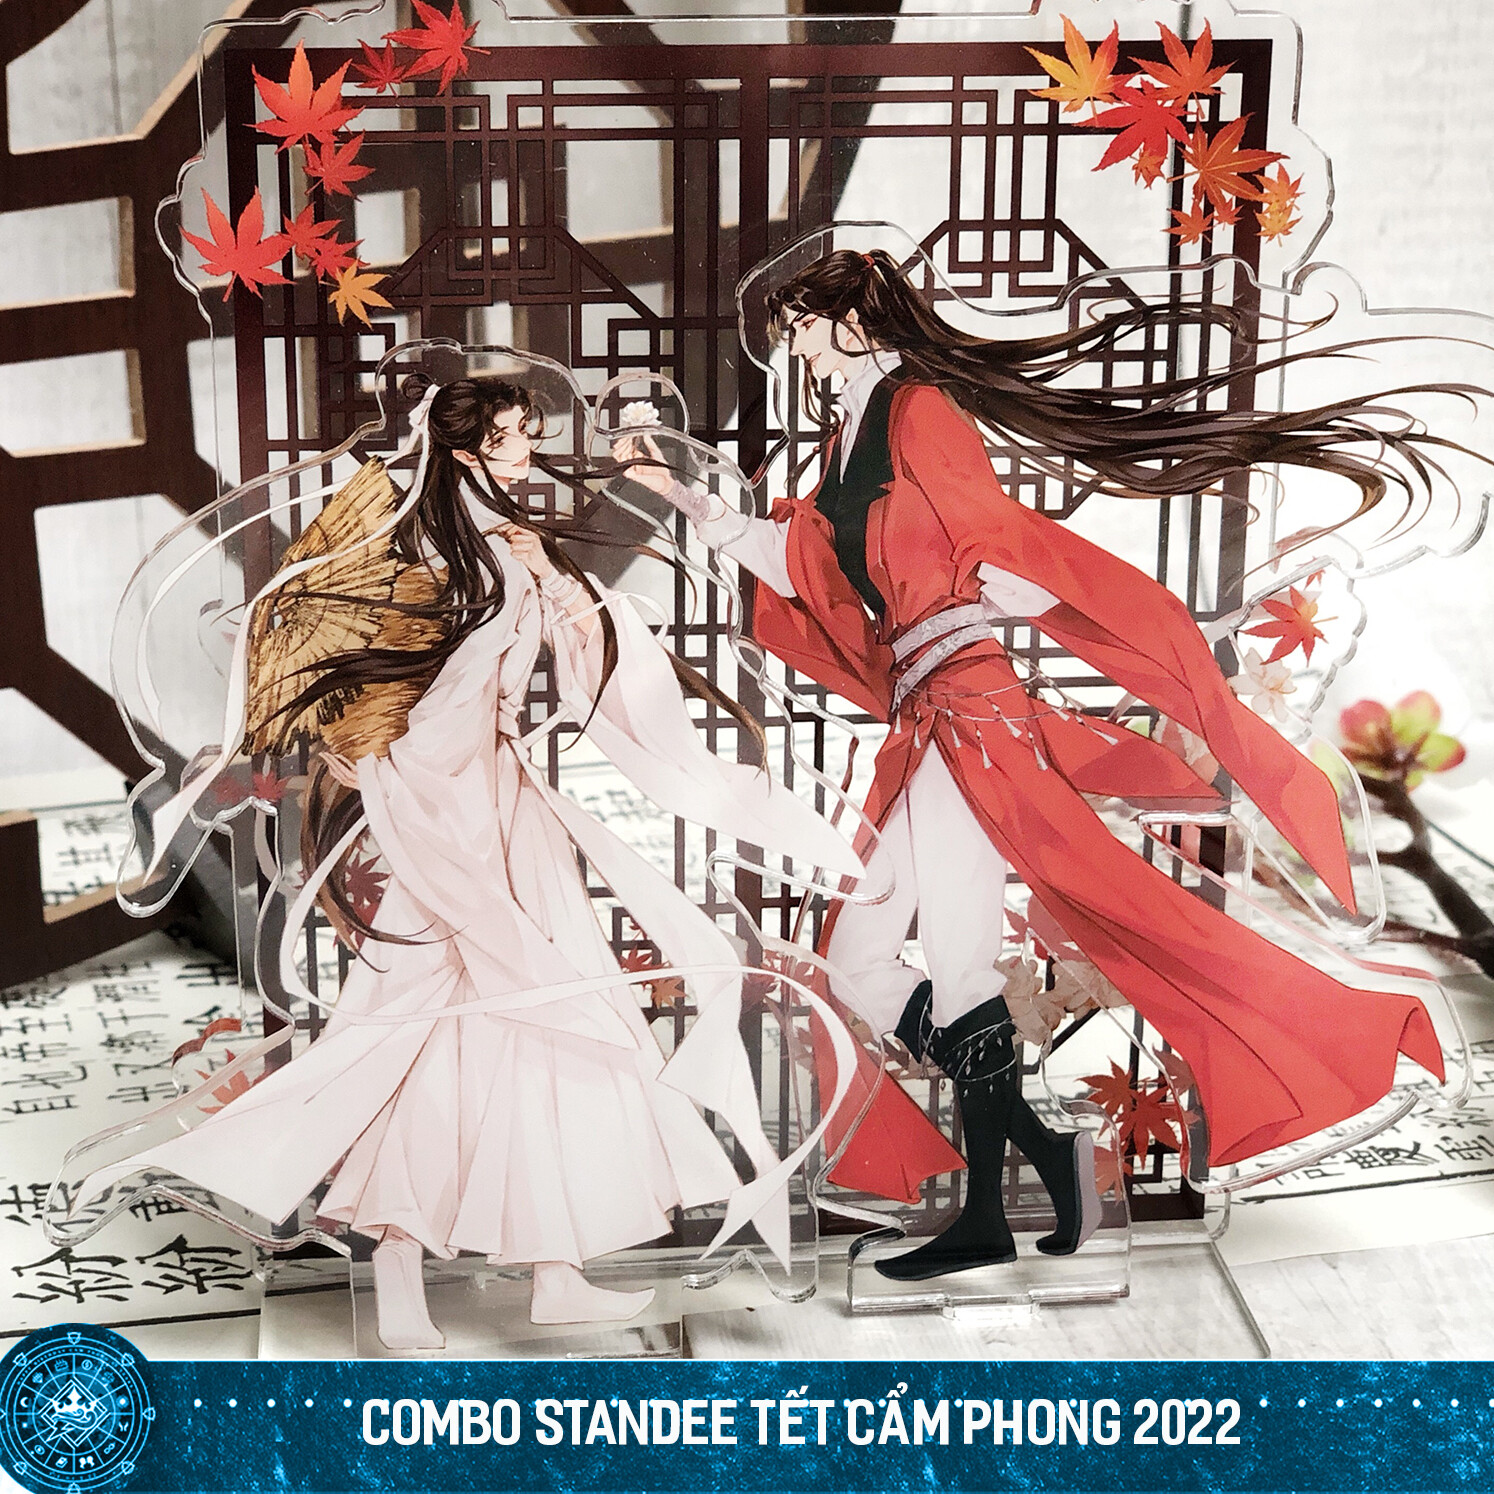 Camphong - 2022 New Year's Standee